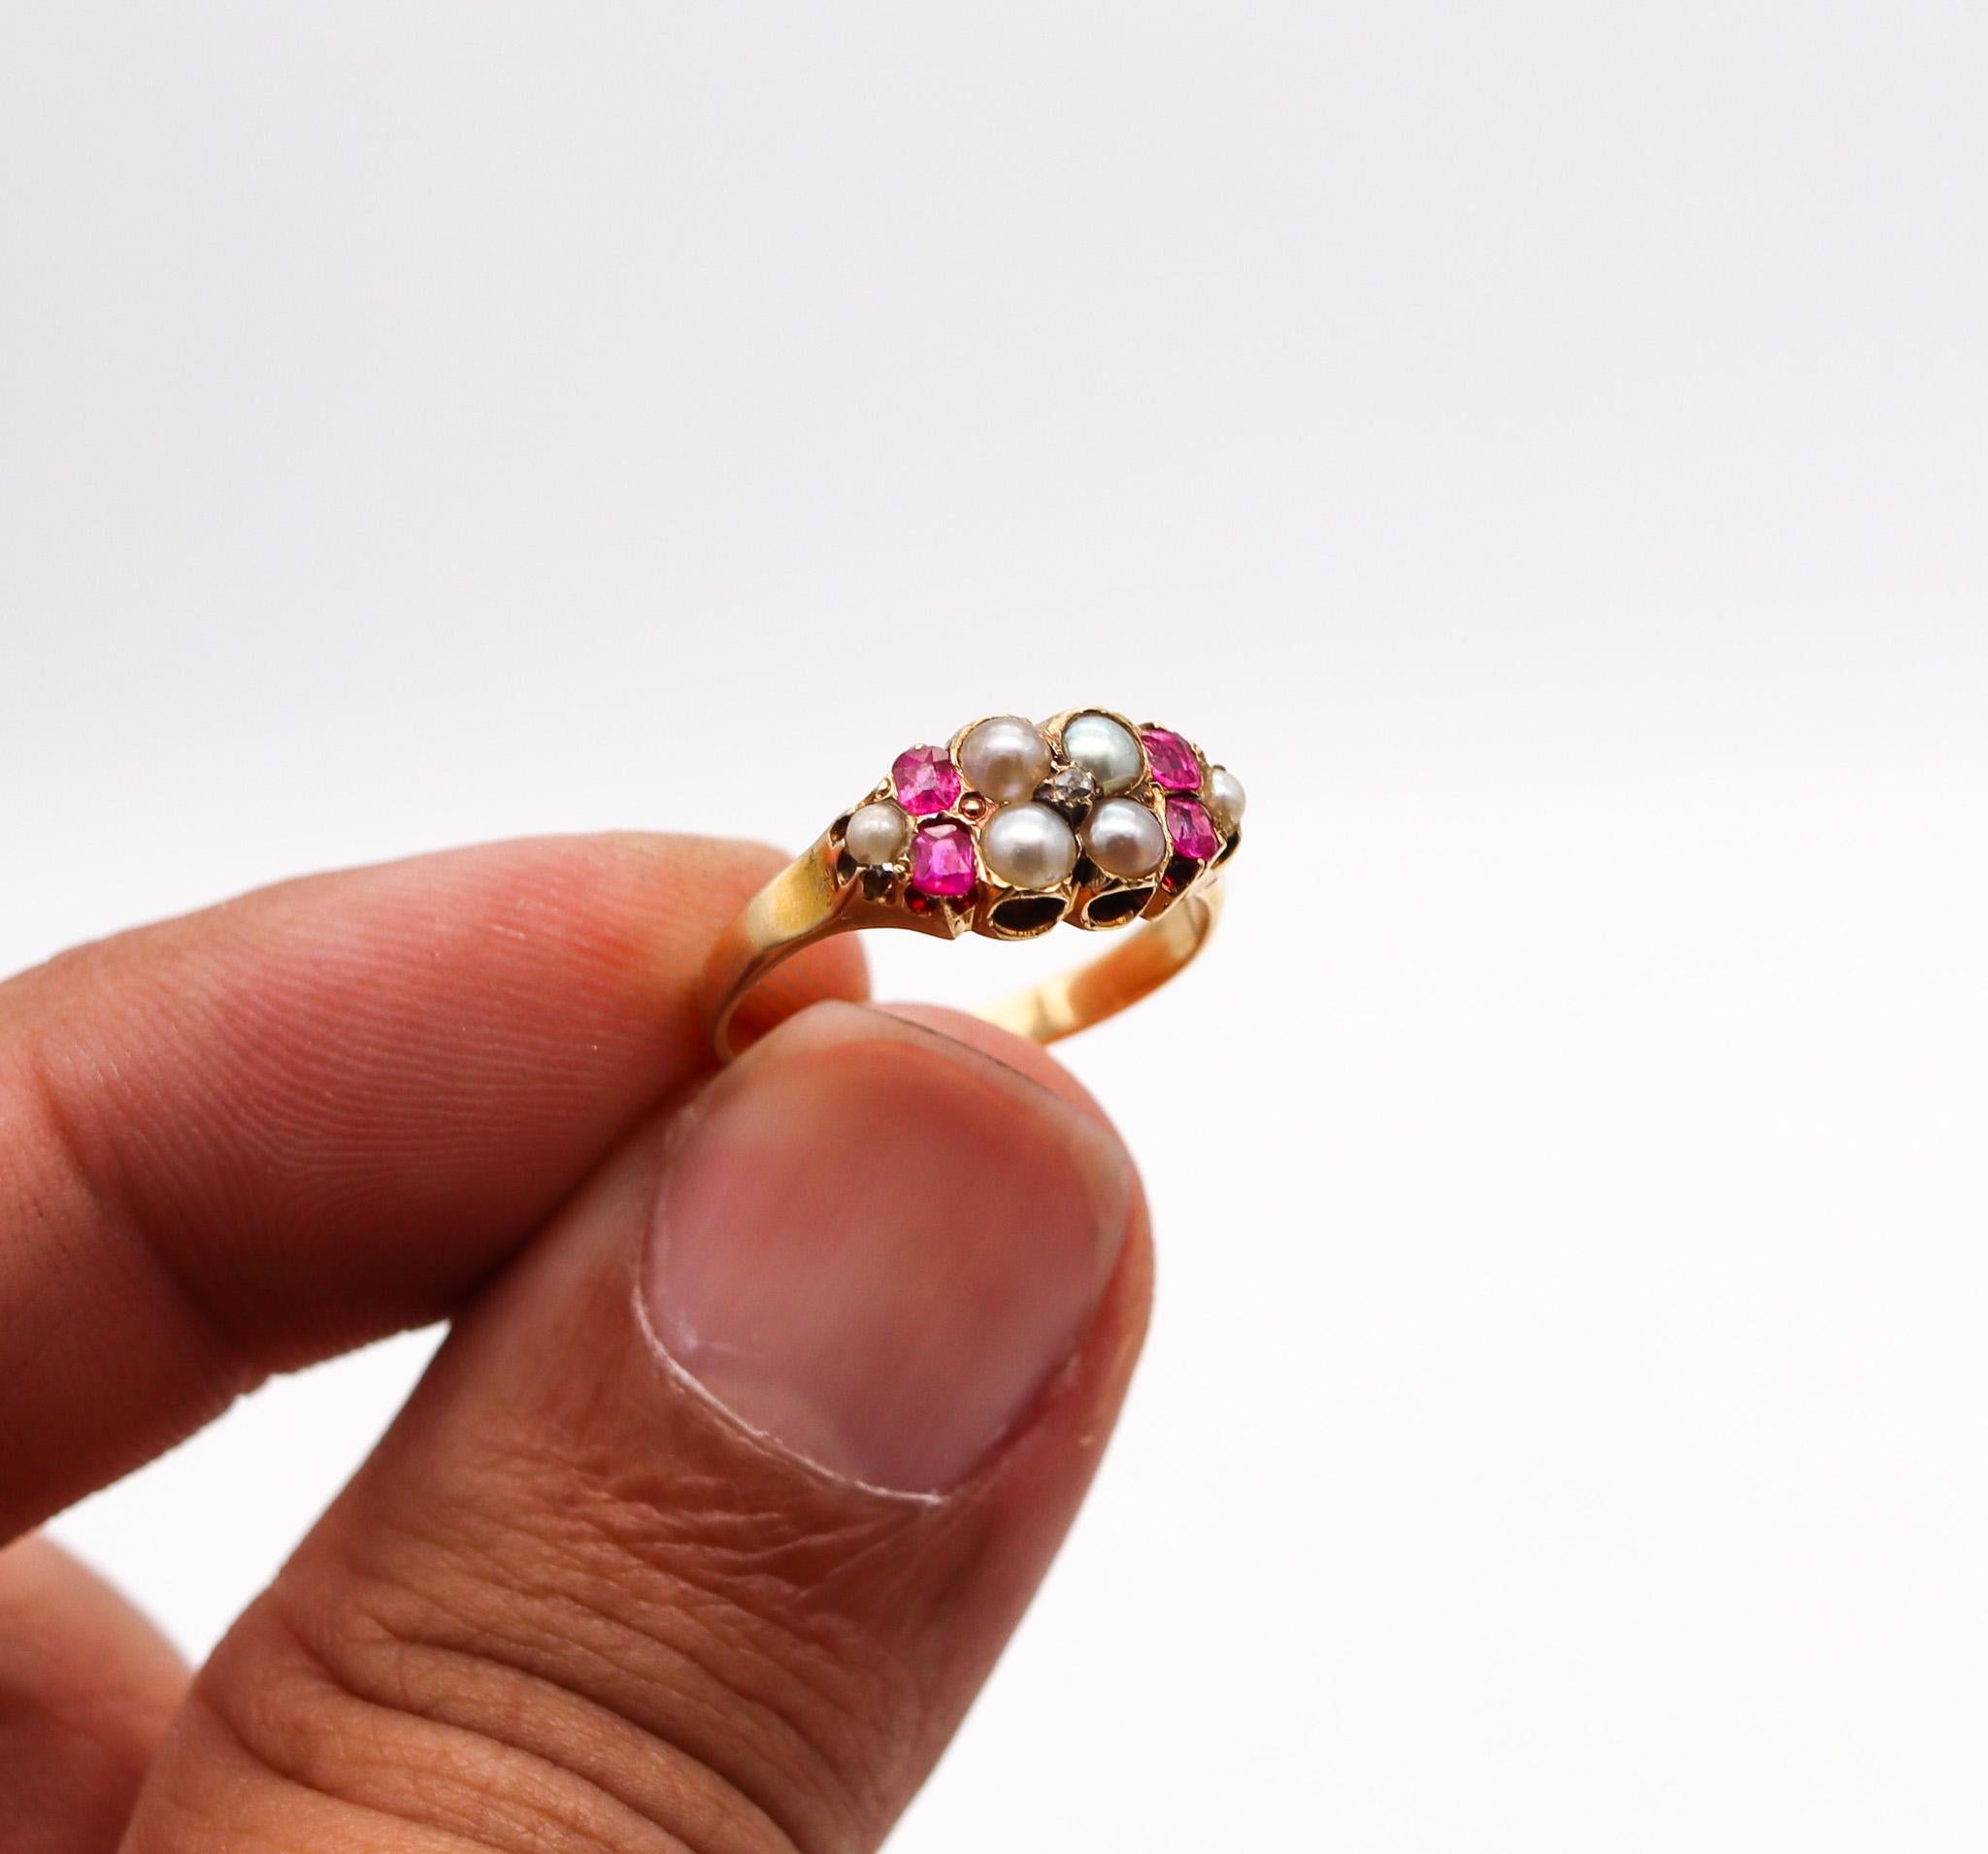 Women's Victorian 1880 Ring In 18Kt Yellow Gold With Rubies And Round White Pearls For Sale